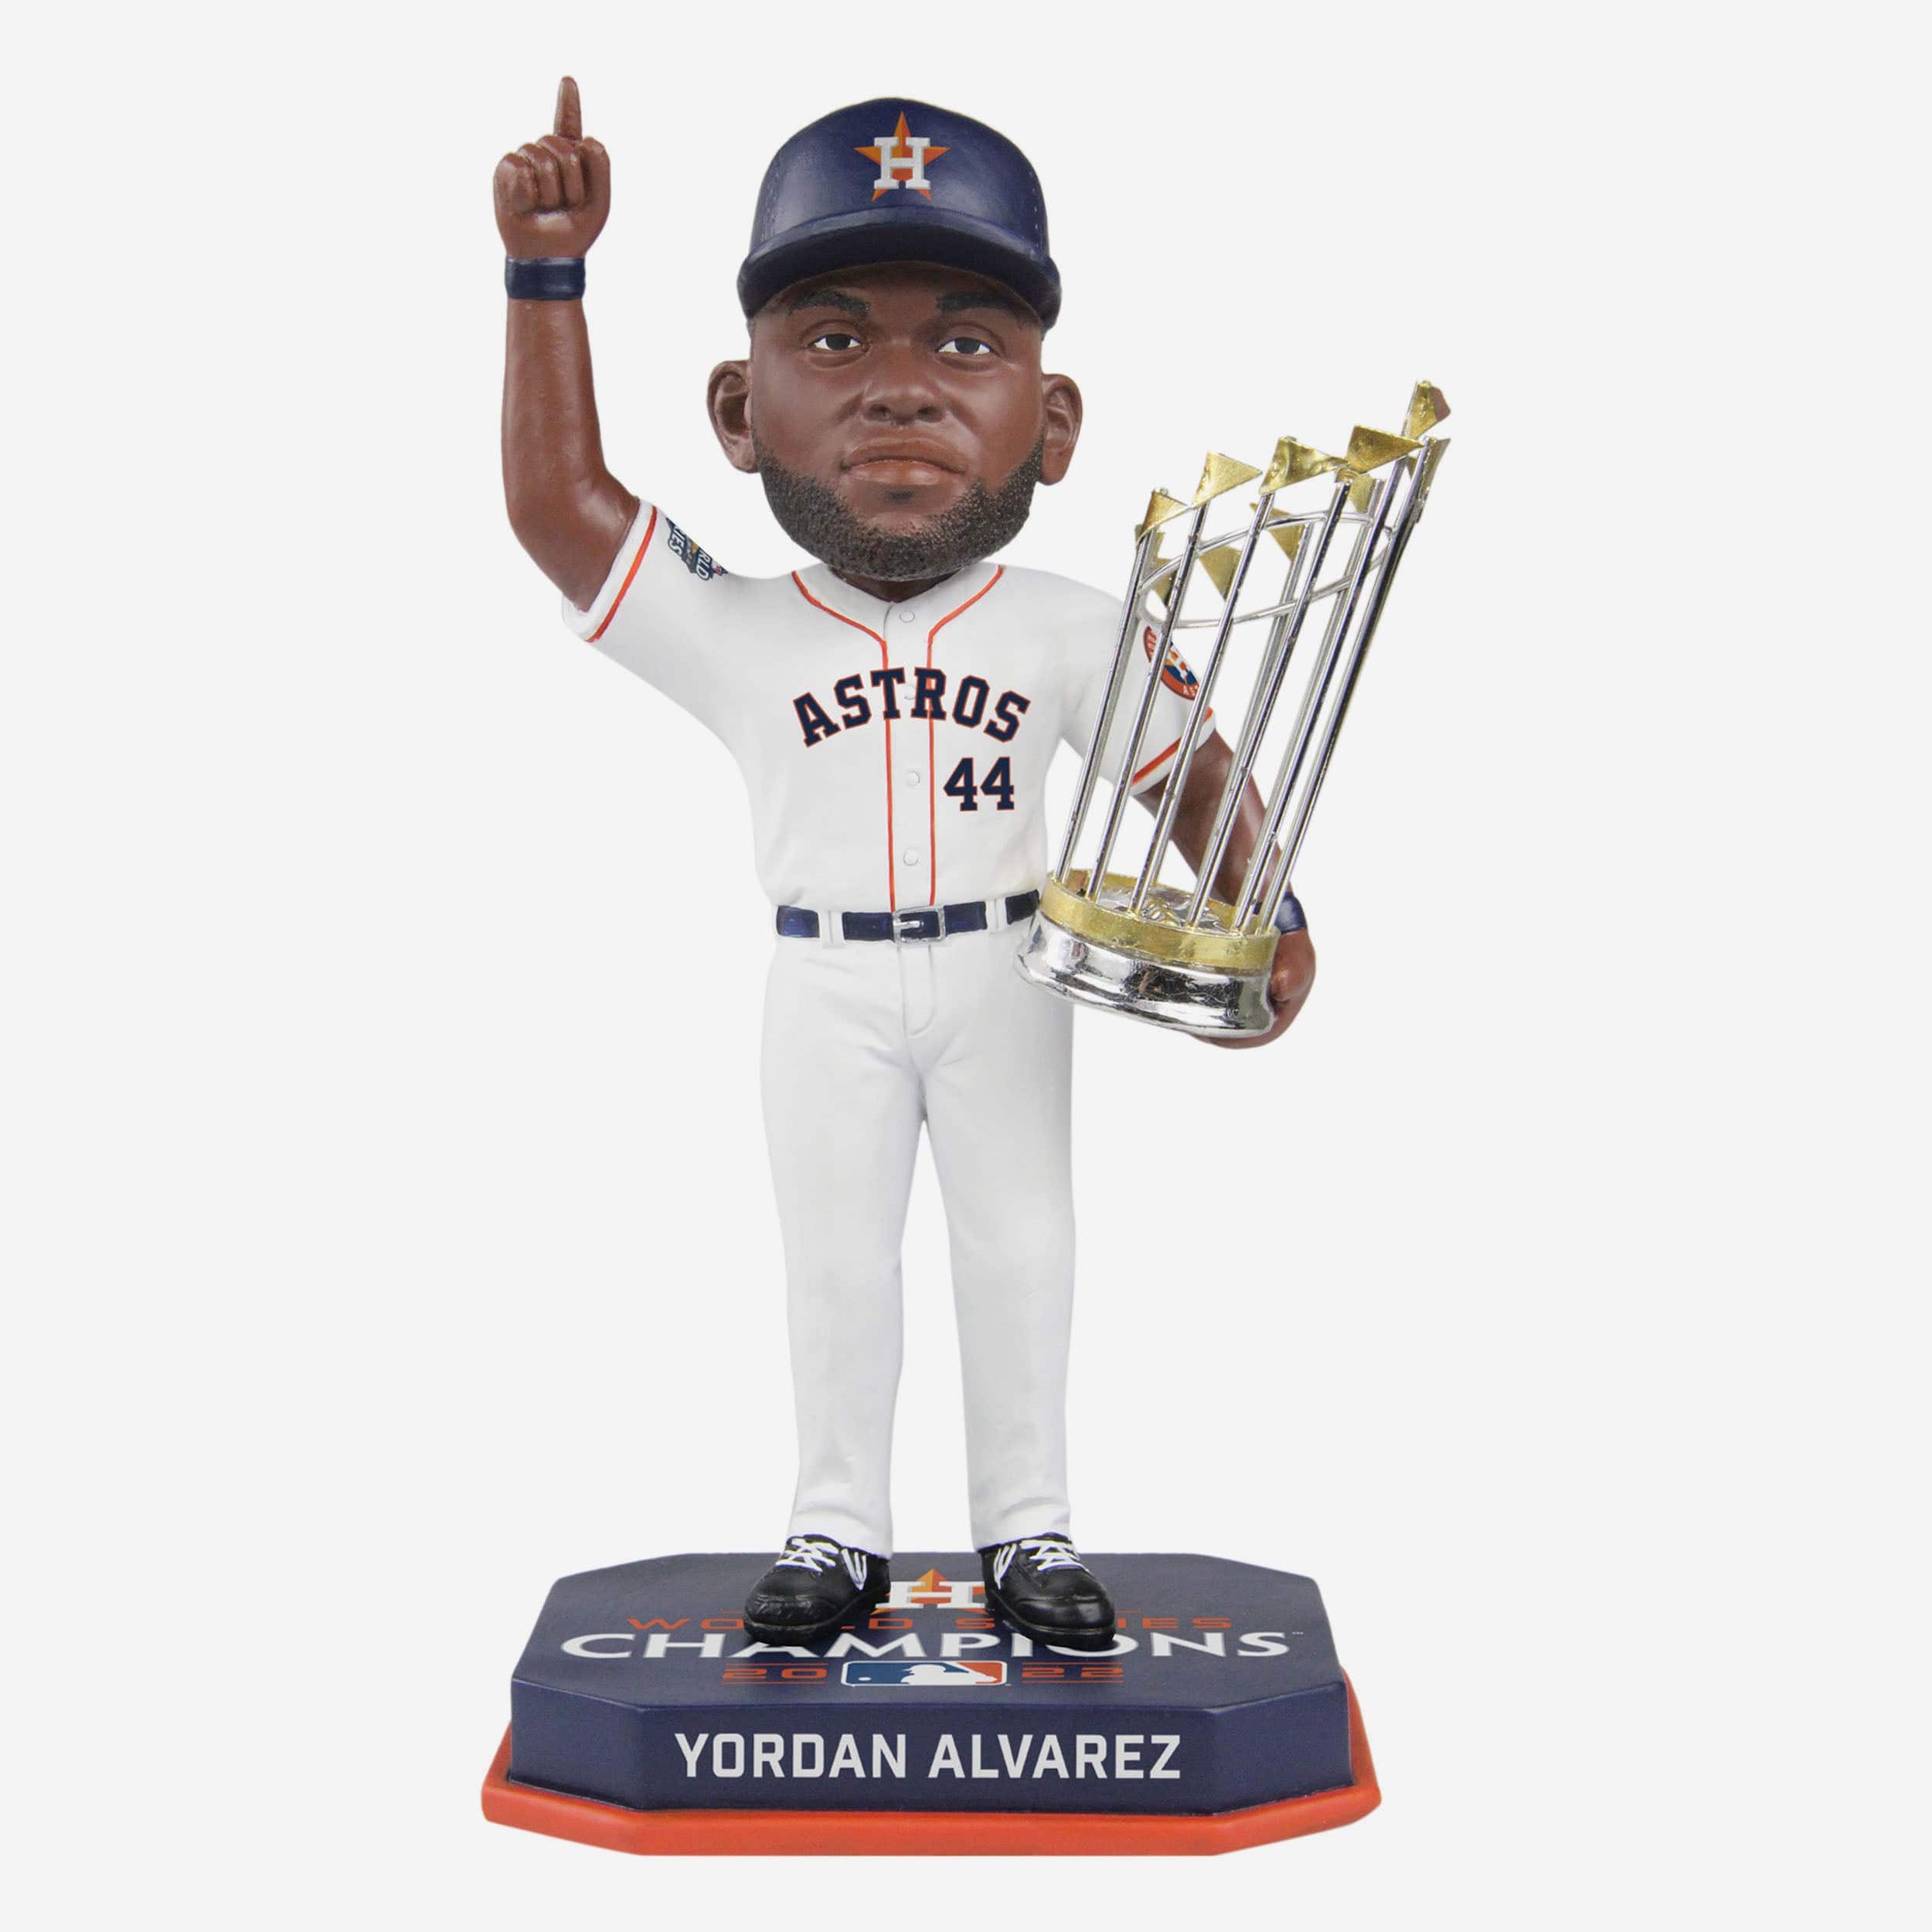 How Yordan Alvarez's Wife and a Bobblehead Giveaway Inspired the